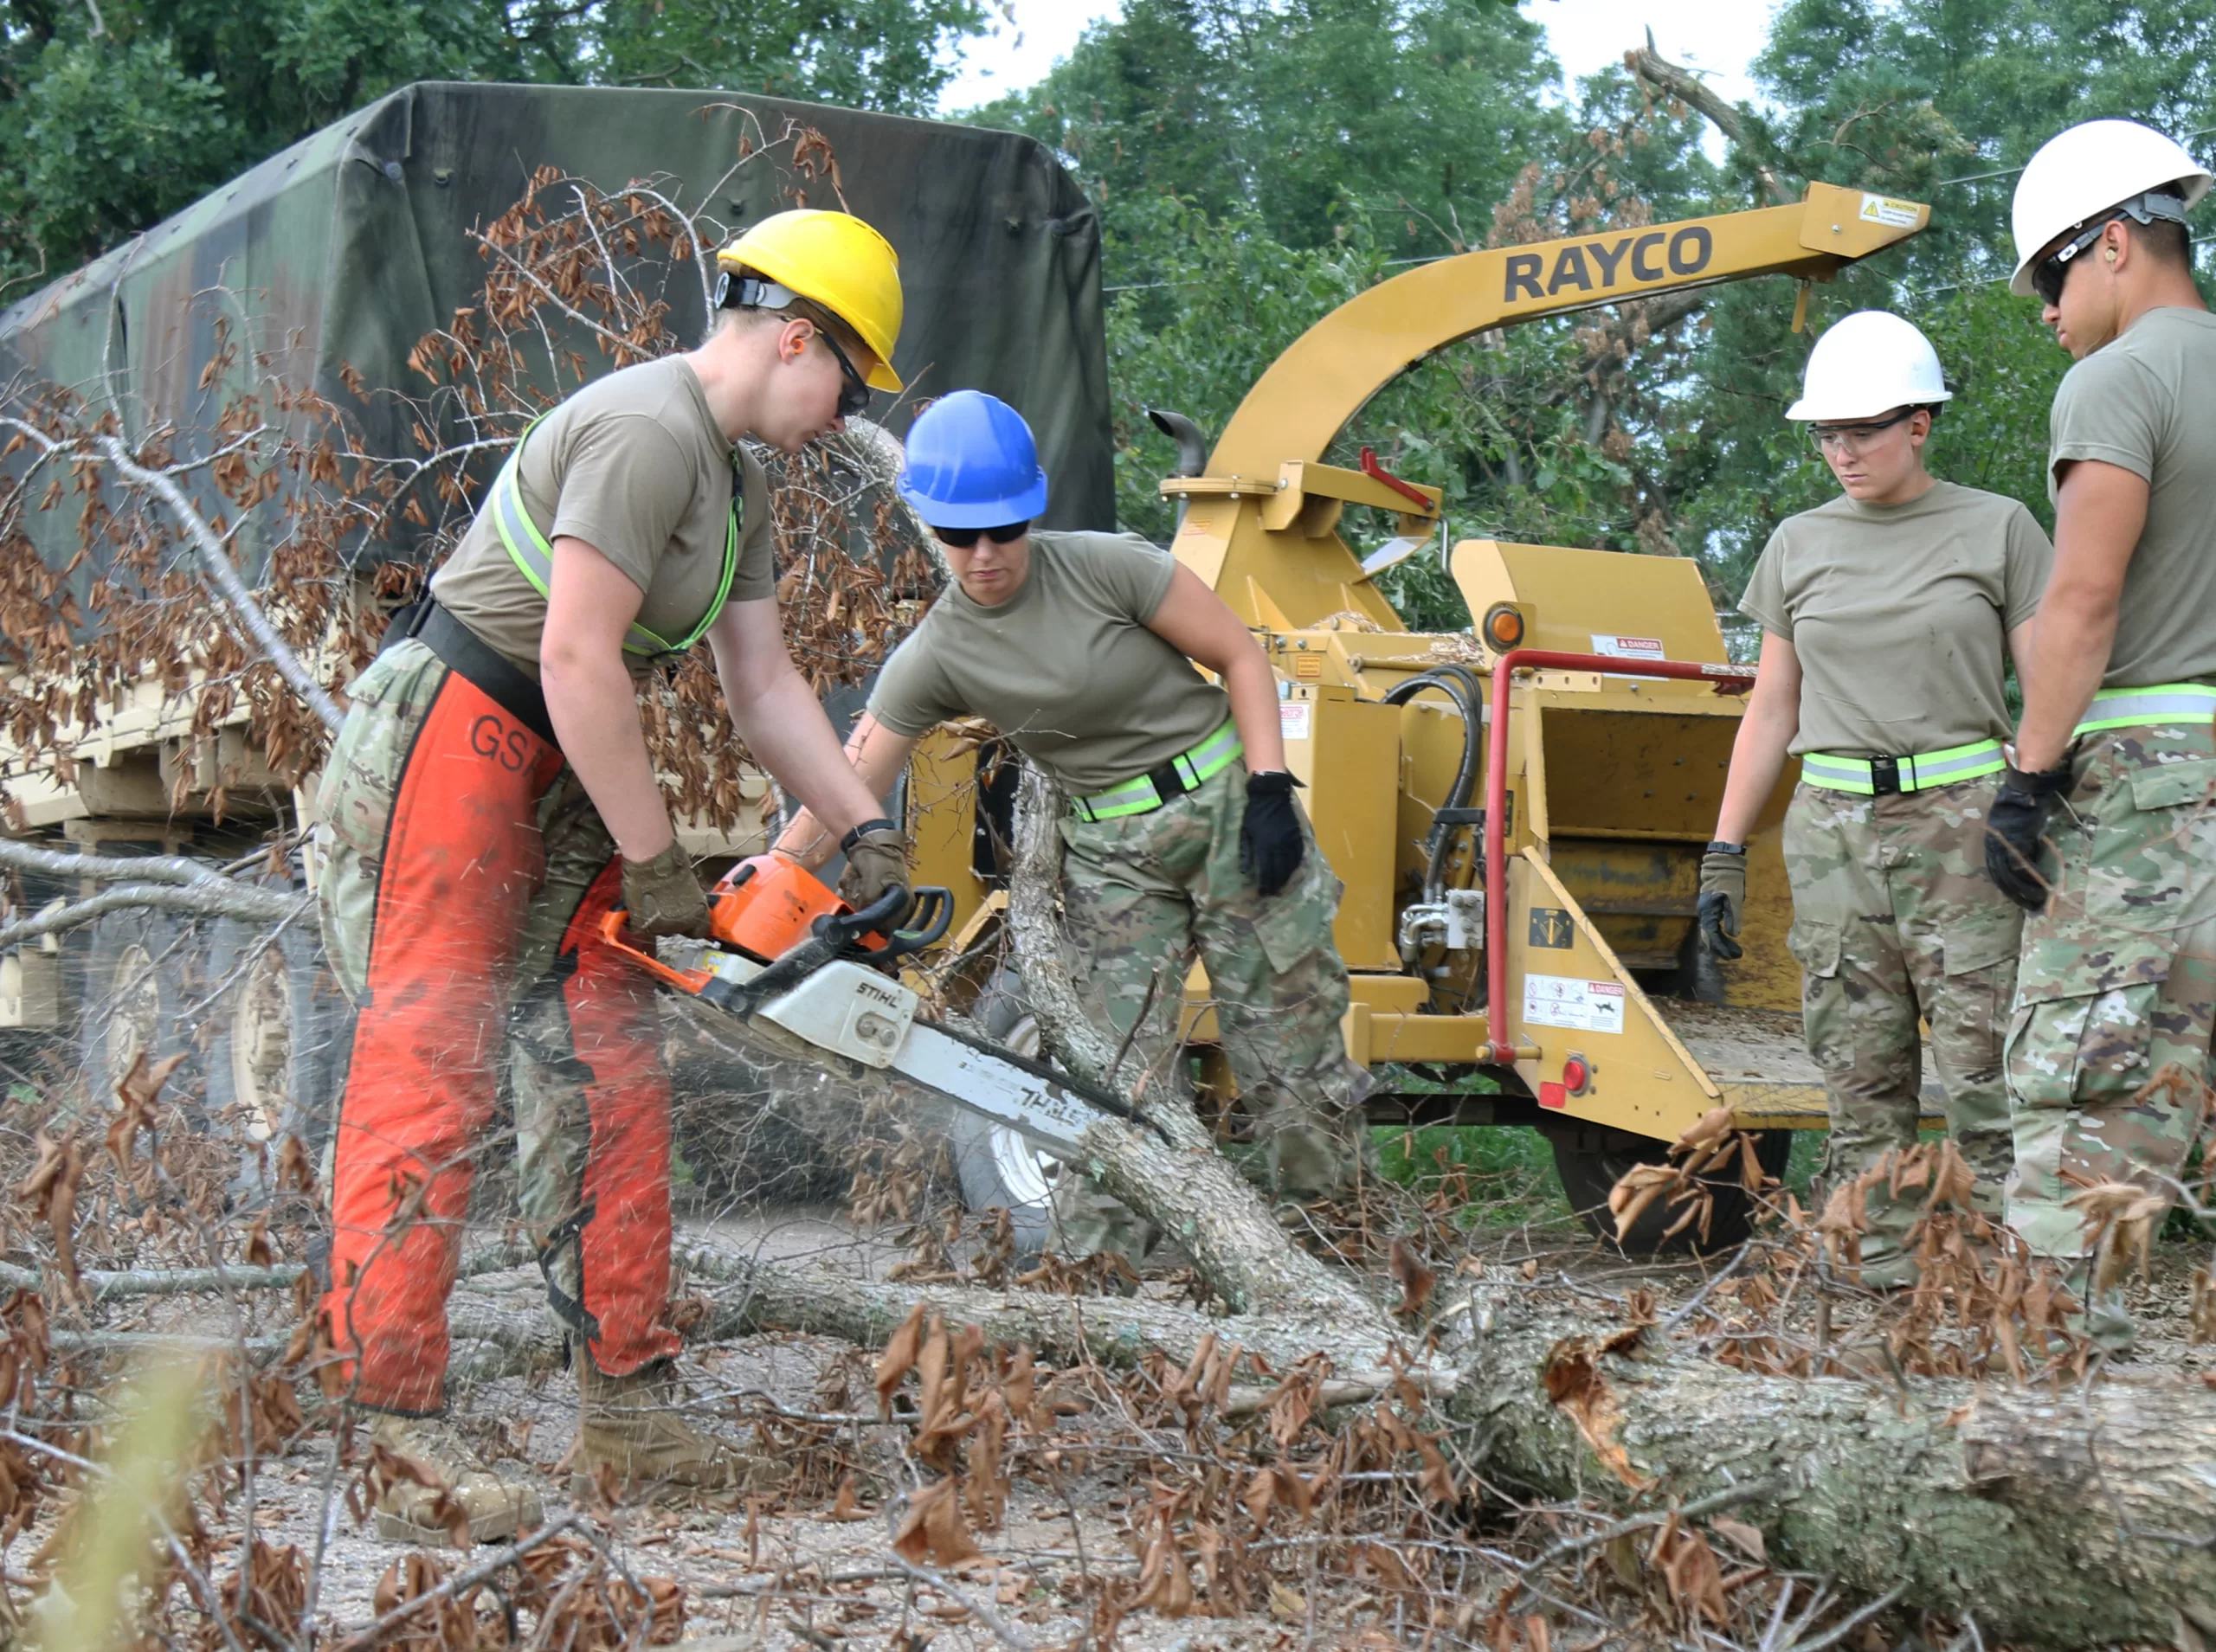 A team of Soldiers with the Wisconsin Army National Guard cut and chip debris, clearing roadways in Balsam Lake, Wis., Aug. 5. Approximately 100 Soldiers and Airmen from the Wisconsin Army and Air National Guard continue to assist civil authorities with damage assessment and debris clearance in Polk and Barron Counties after being mobilized to state active duty to support recovery efforts following the severe weather that struck Northern Wisconsin July 19-20. (112th Mobile Public Affairs Detachment photo by Staff Sgt. Alexandria Hughes/Released)